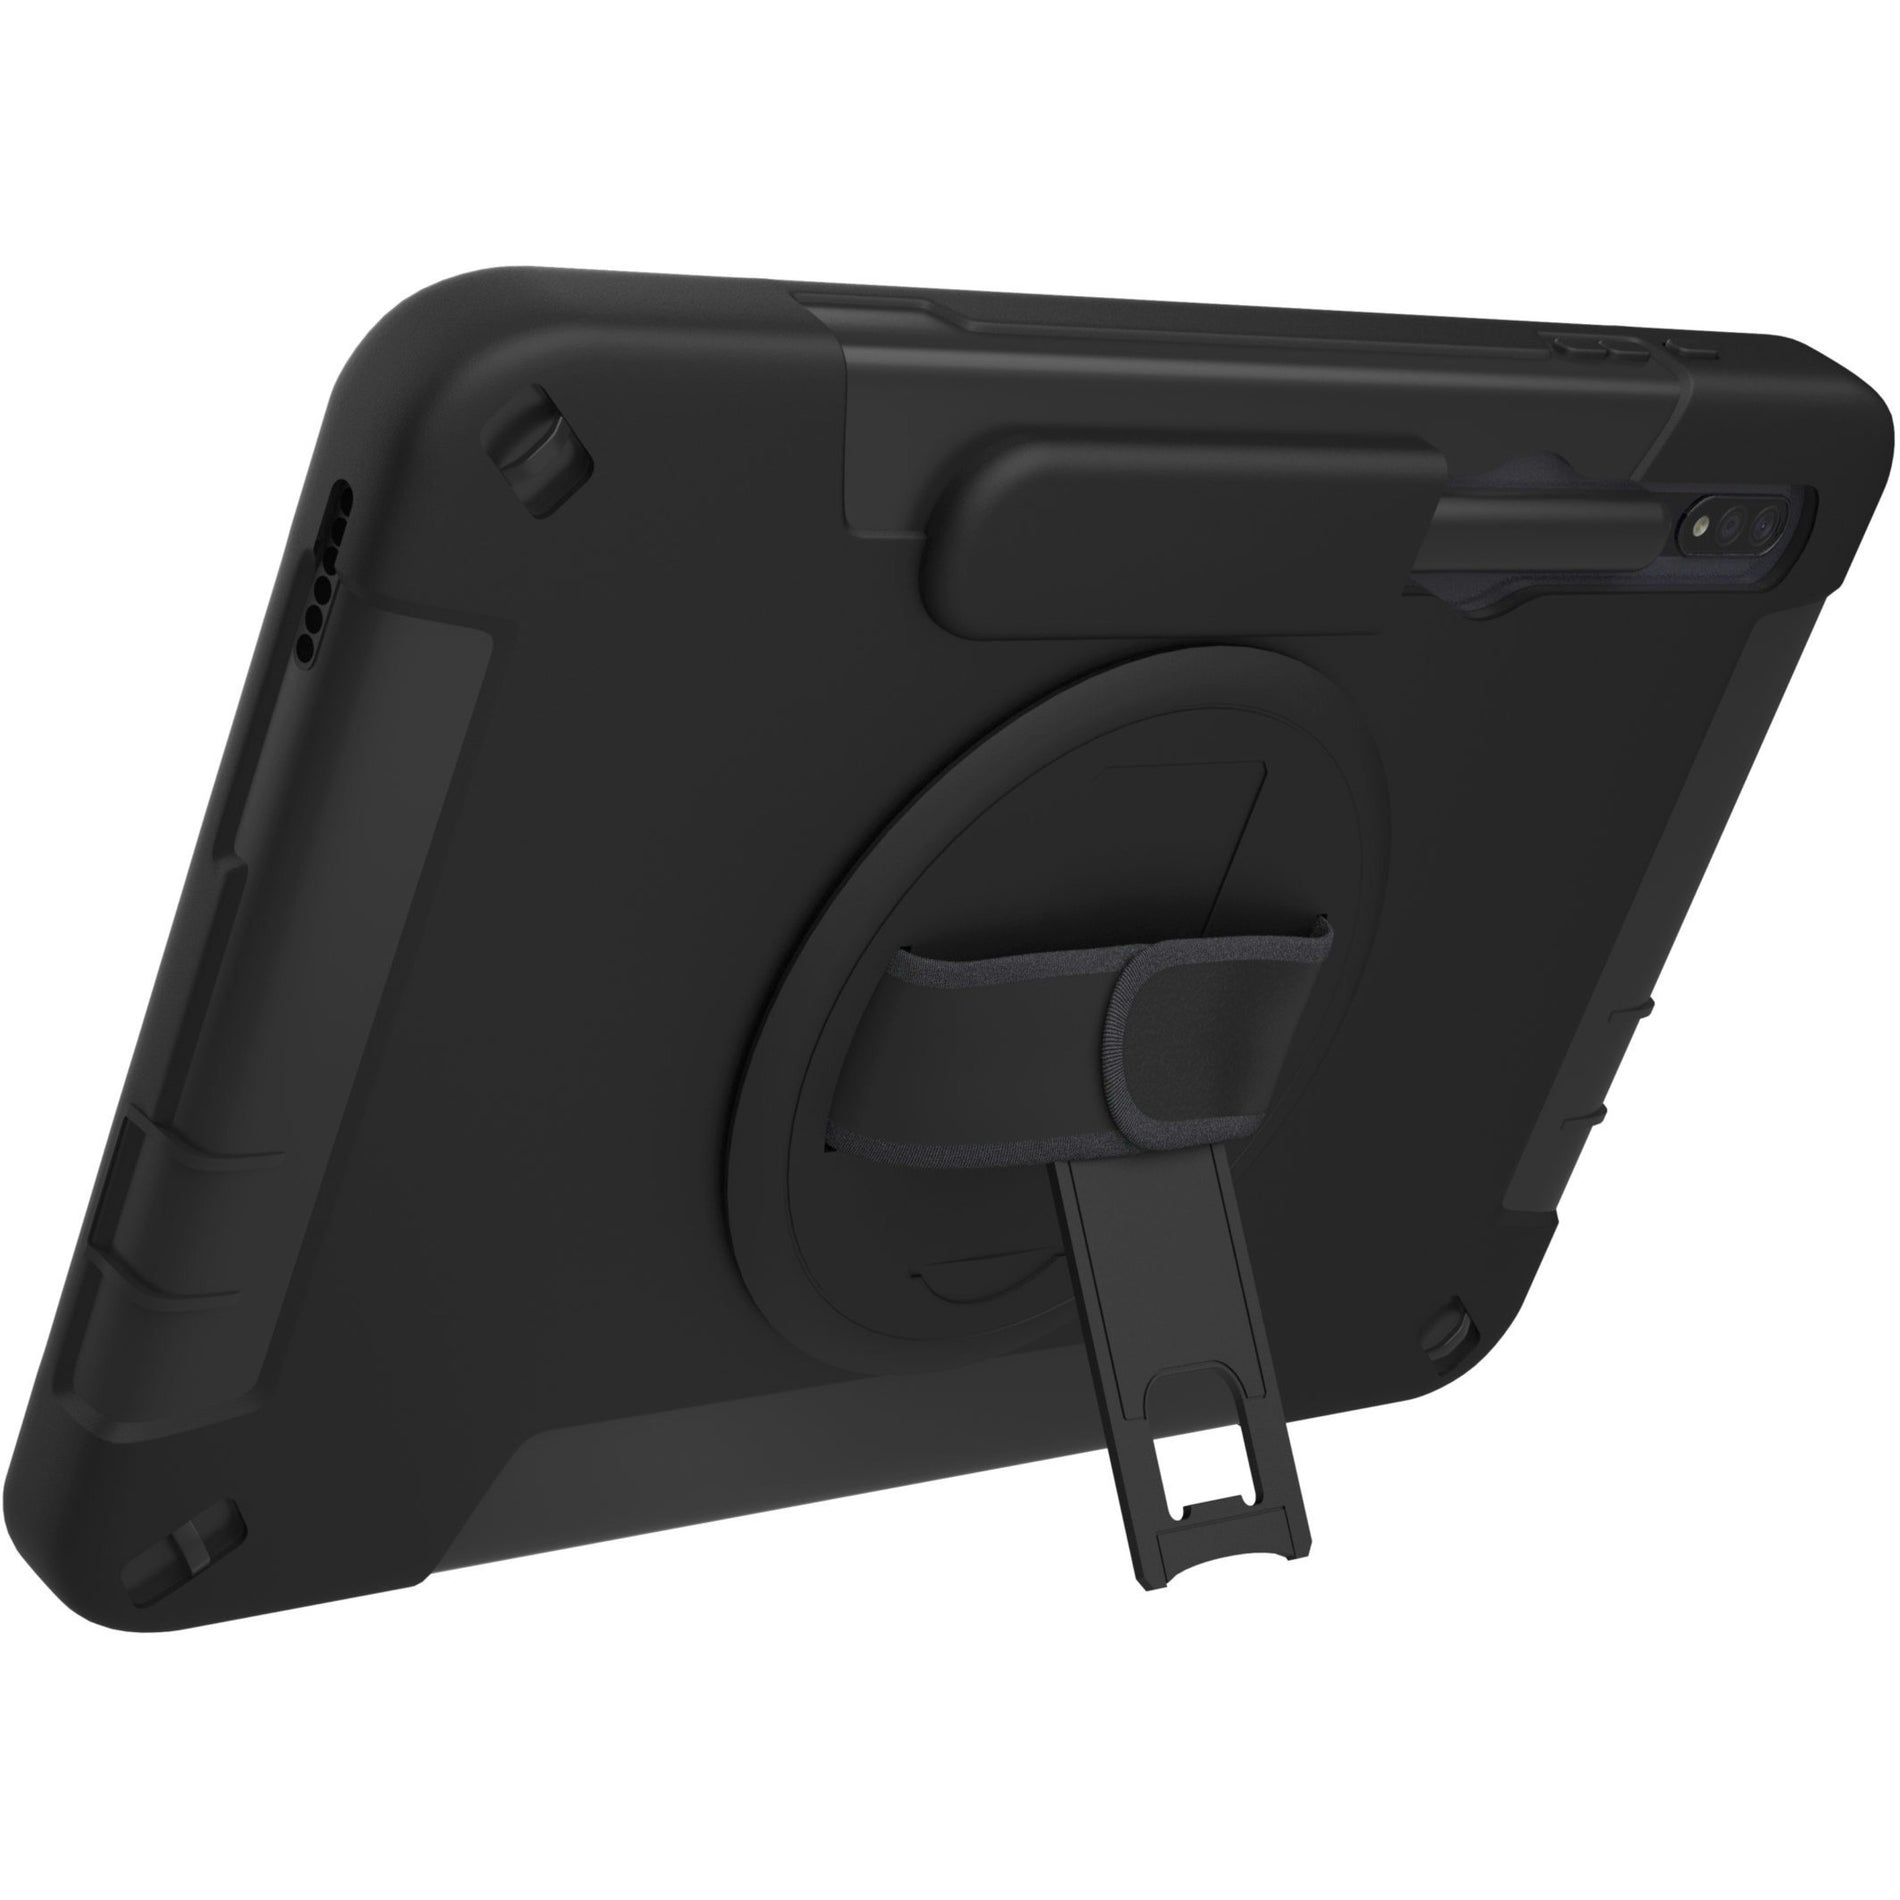 CTA Digital PAD-PCGKS7 Tablet Case, Carrying Case for Samsung Galaxy Tab S7, S Pen, Hand Grip